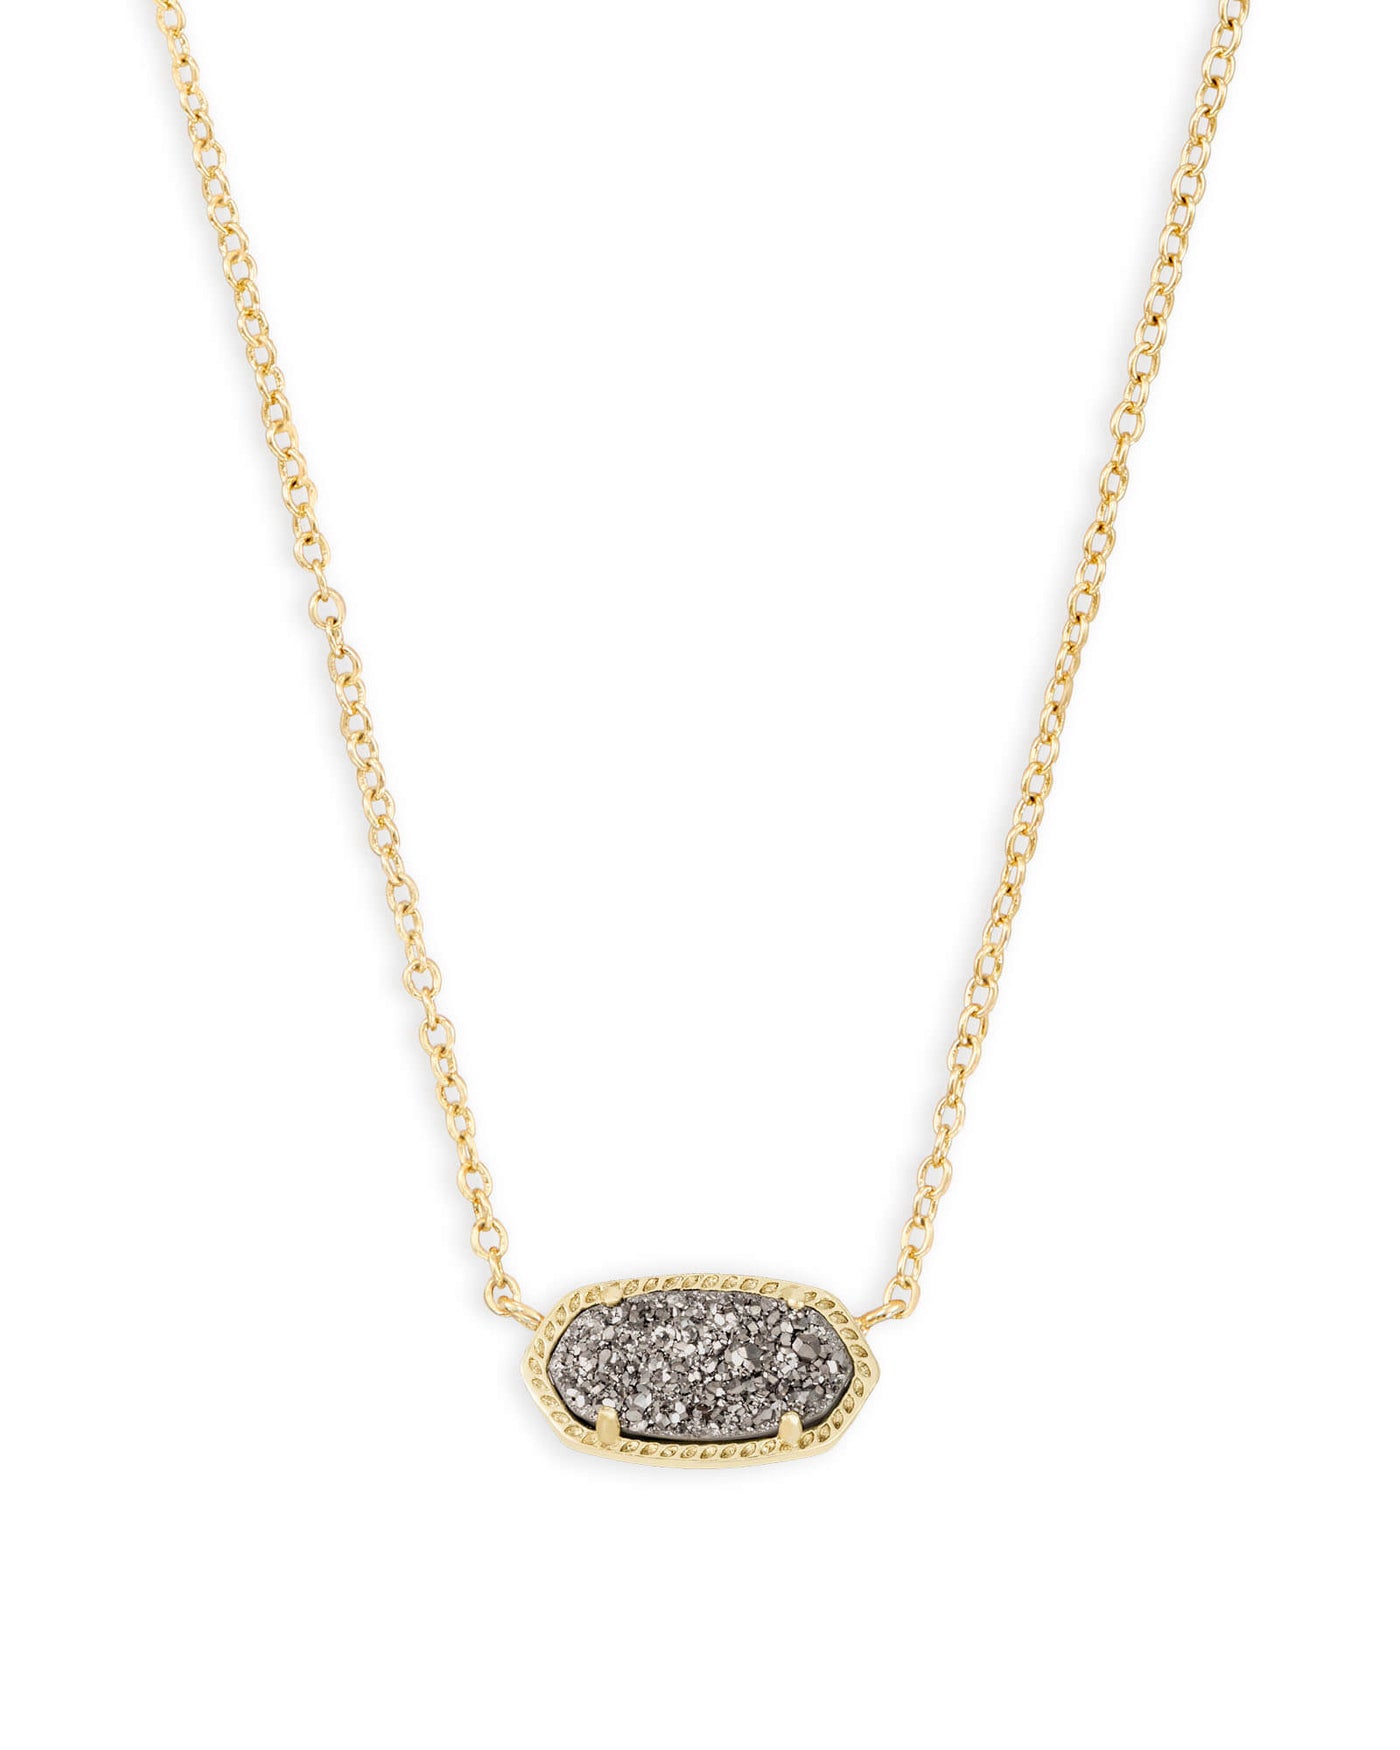 Kendra Scott Elisa Gold Pendant Necklace in Platinum Drusy-Necklaces-Kendra Scott-Market Street Nest, Fashionable Clothing, Shoes and Home Décor Located in Mabank, TX